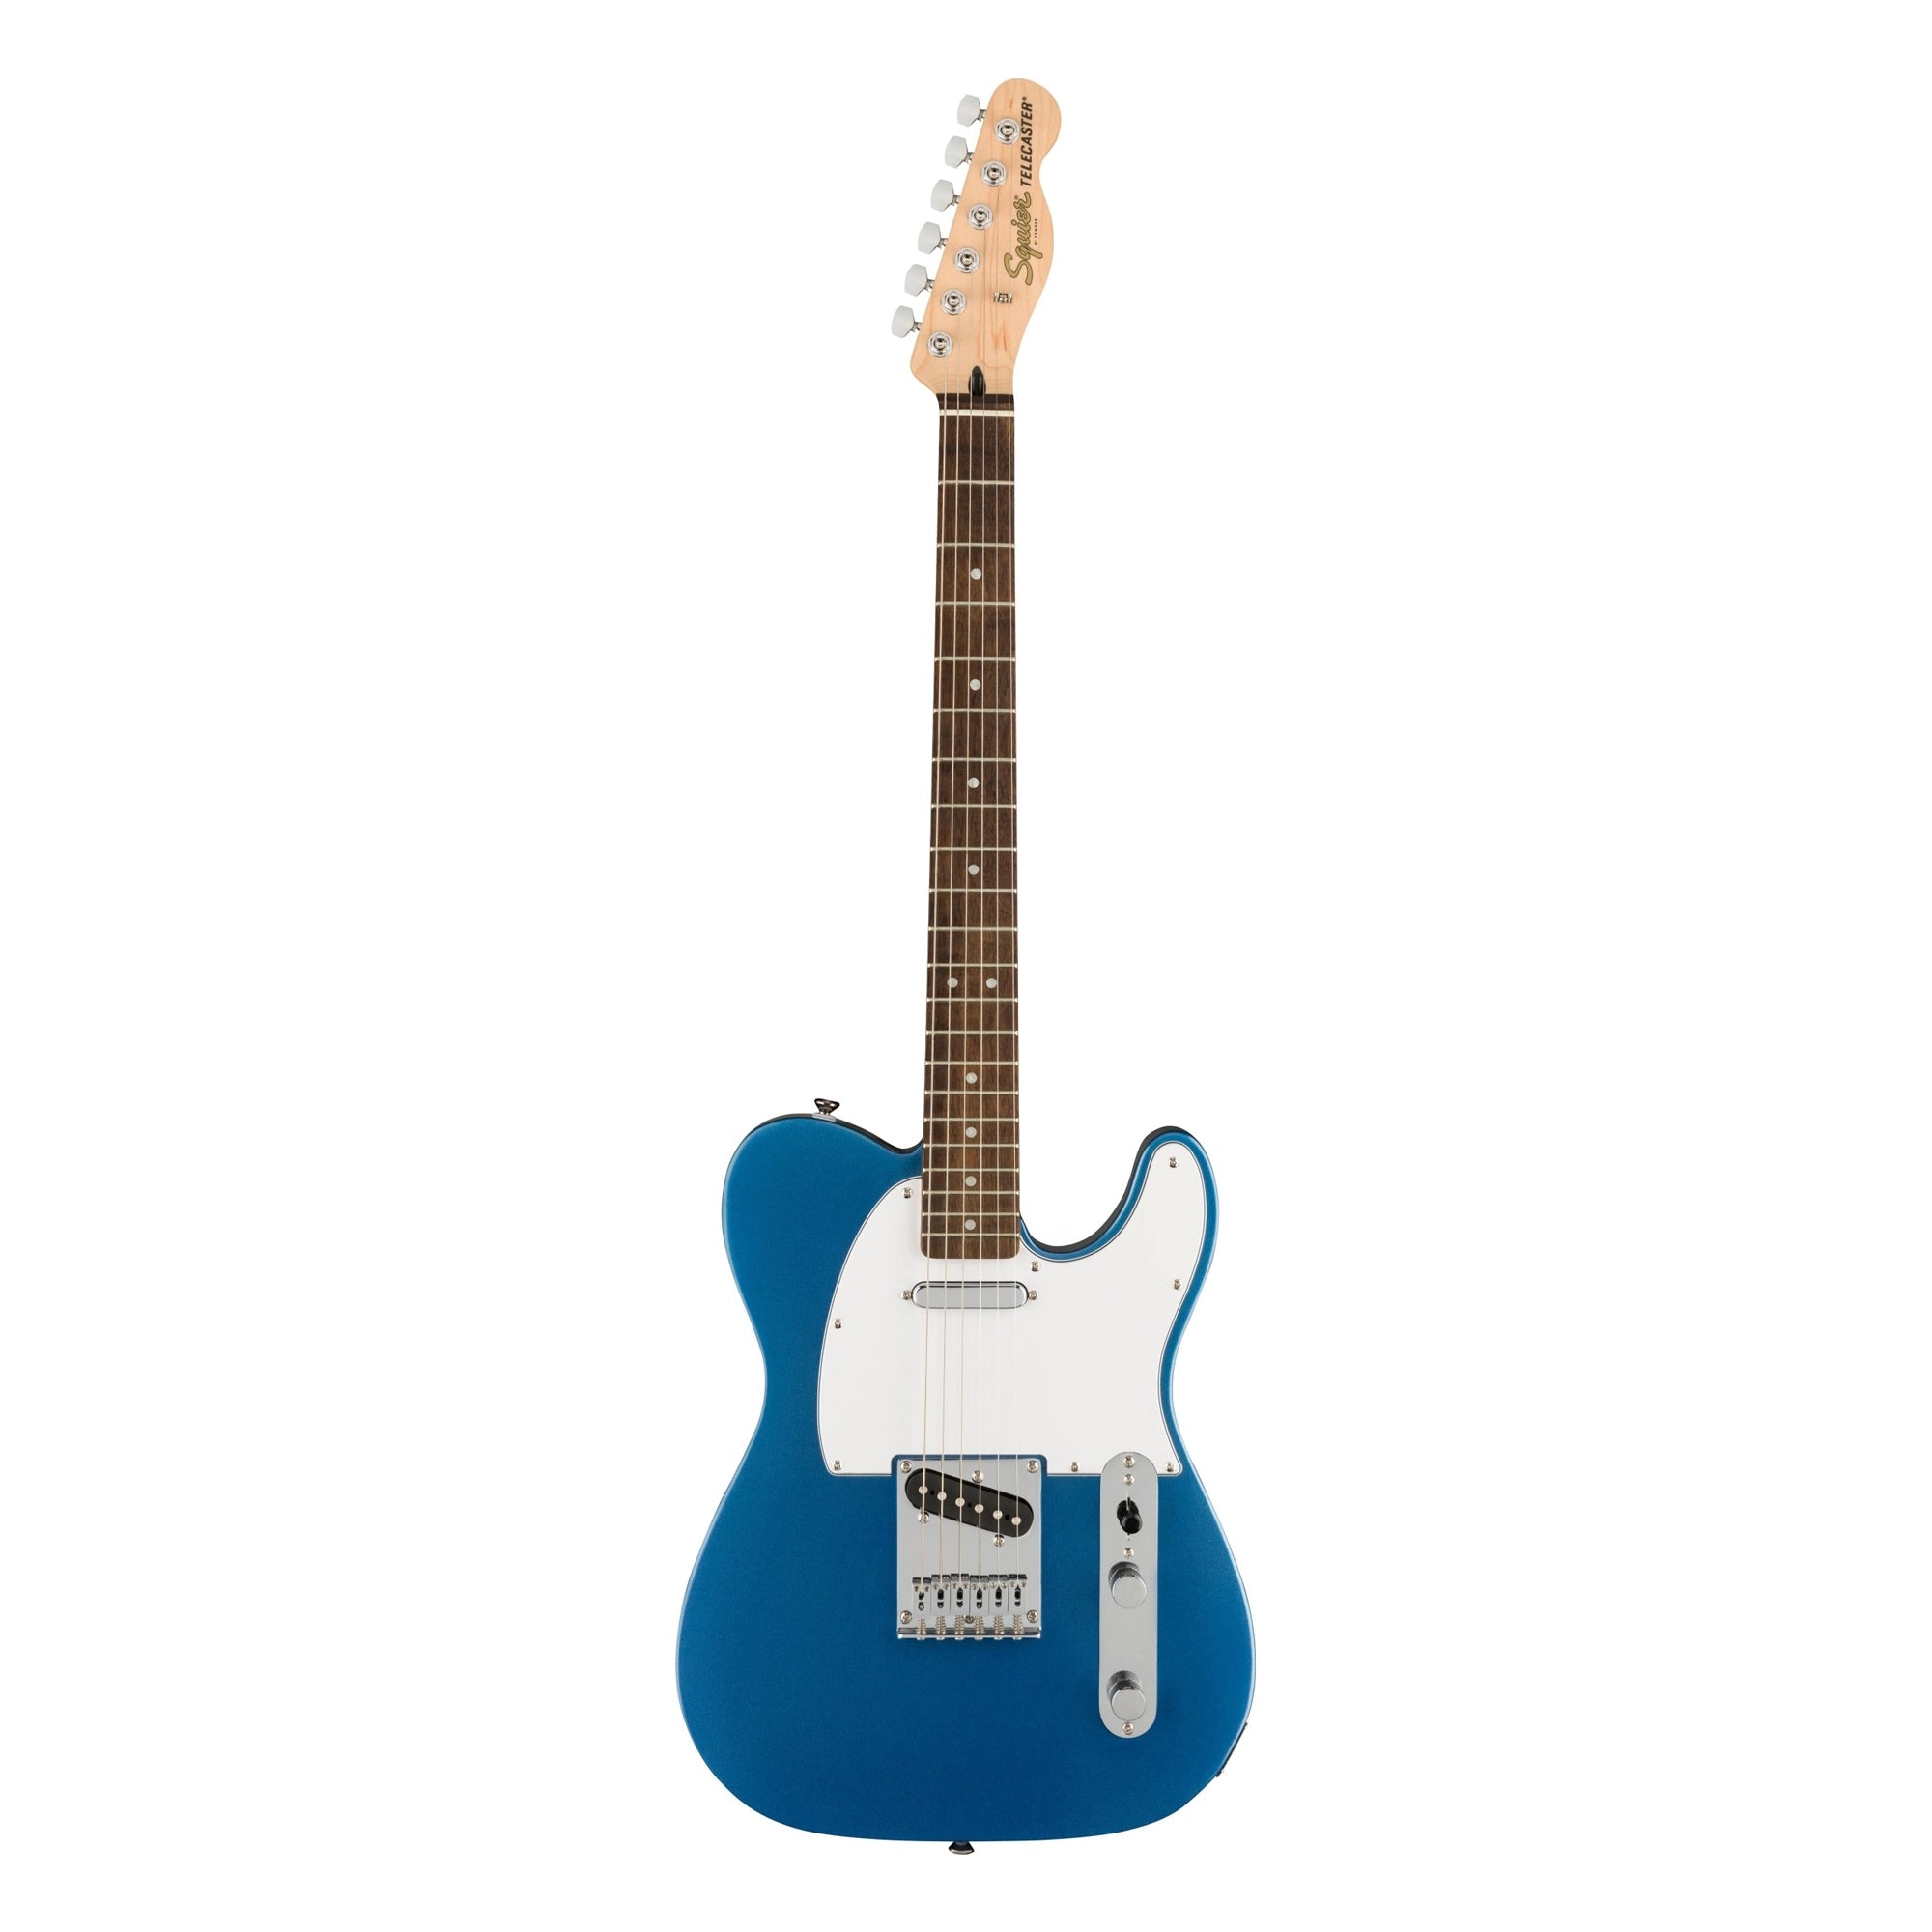 Squier Affinity Telecaster Electric Guitar - Lake Placid Blue